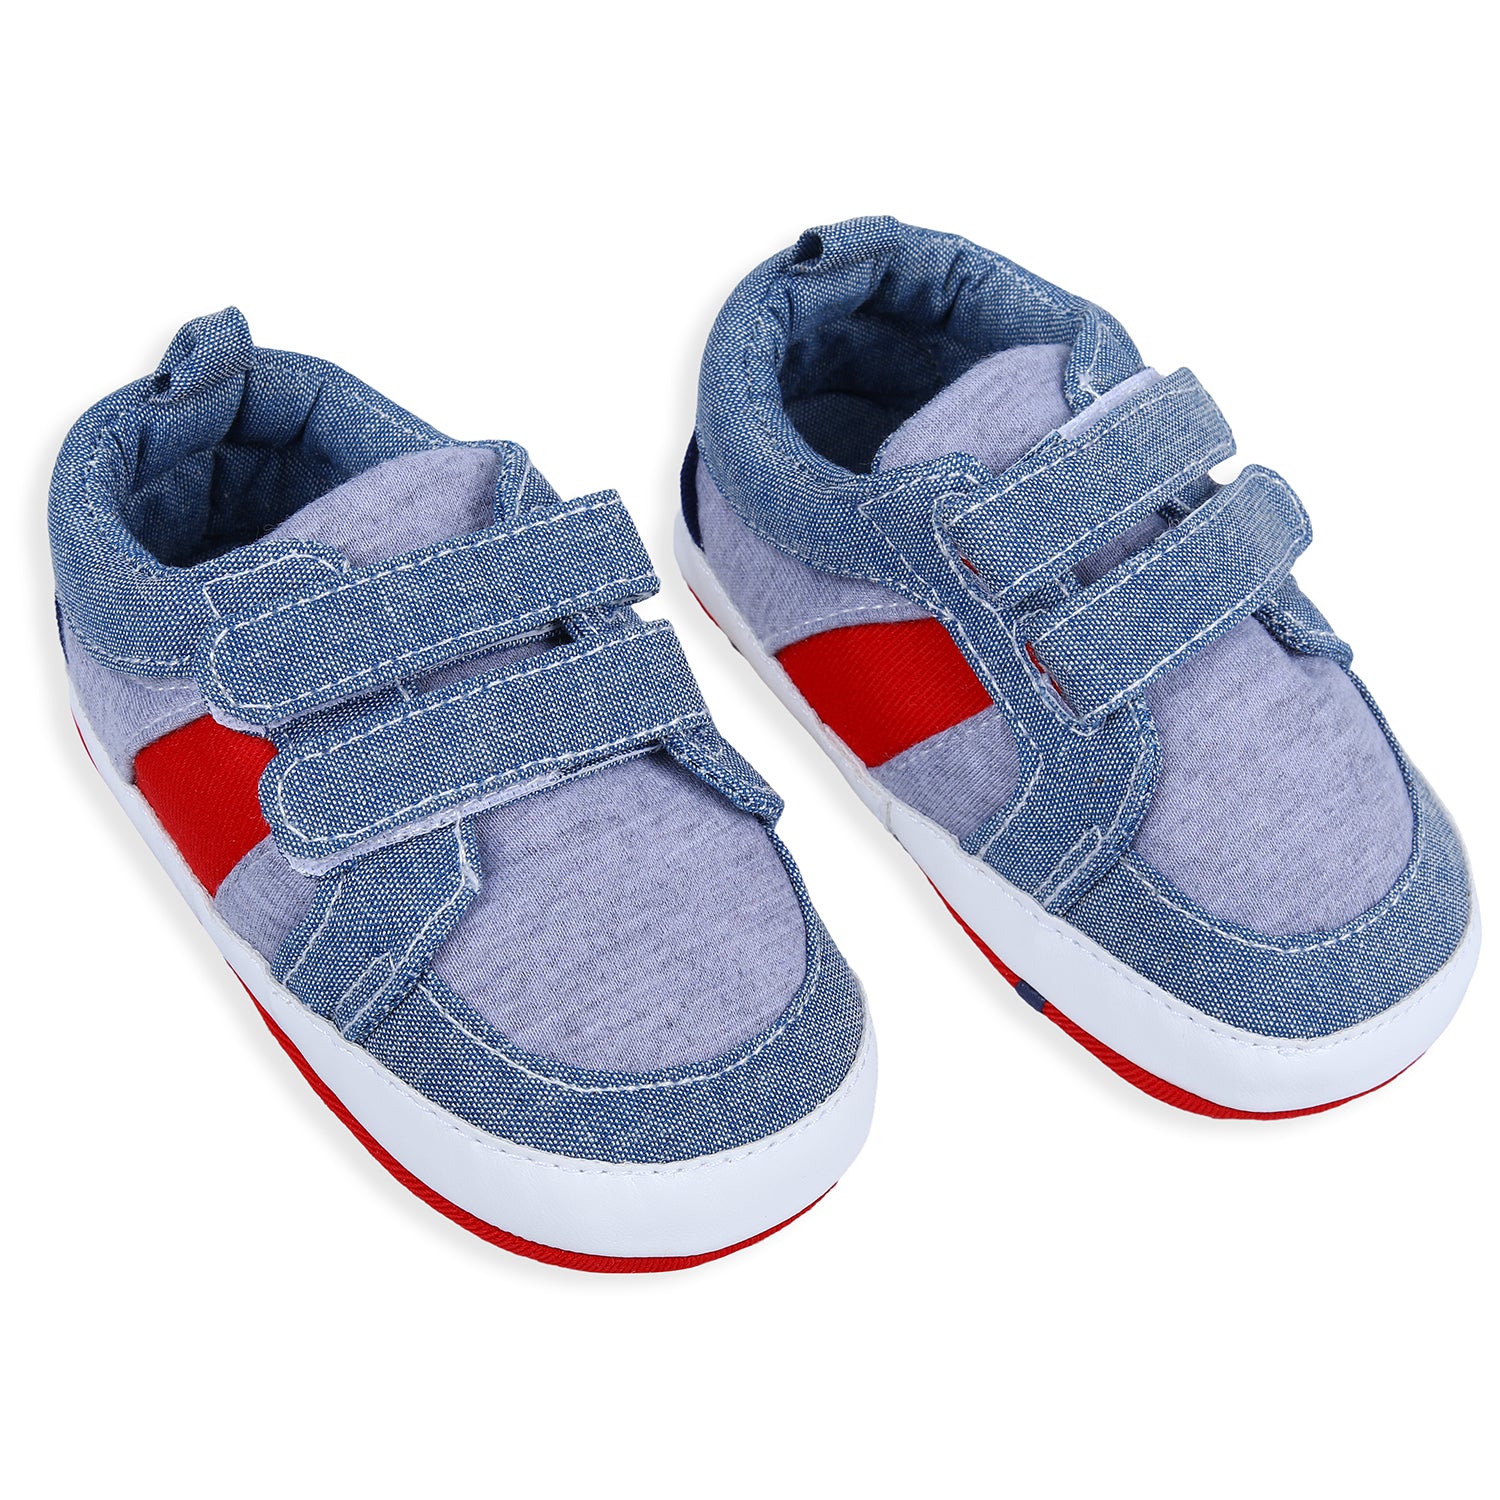 Colour Blocked Cute And Casual Denim Velcro Booties - Blue And Red - Baby Moo